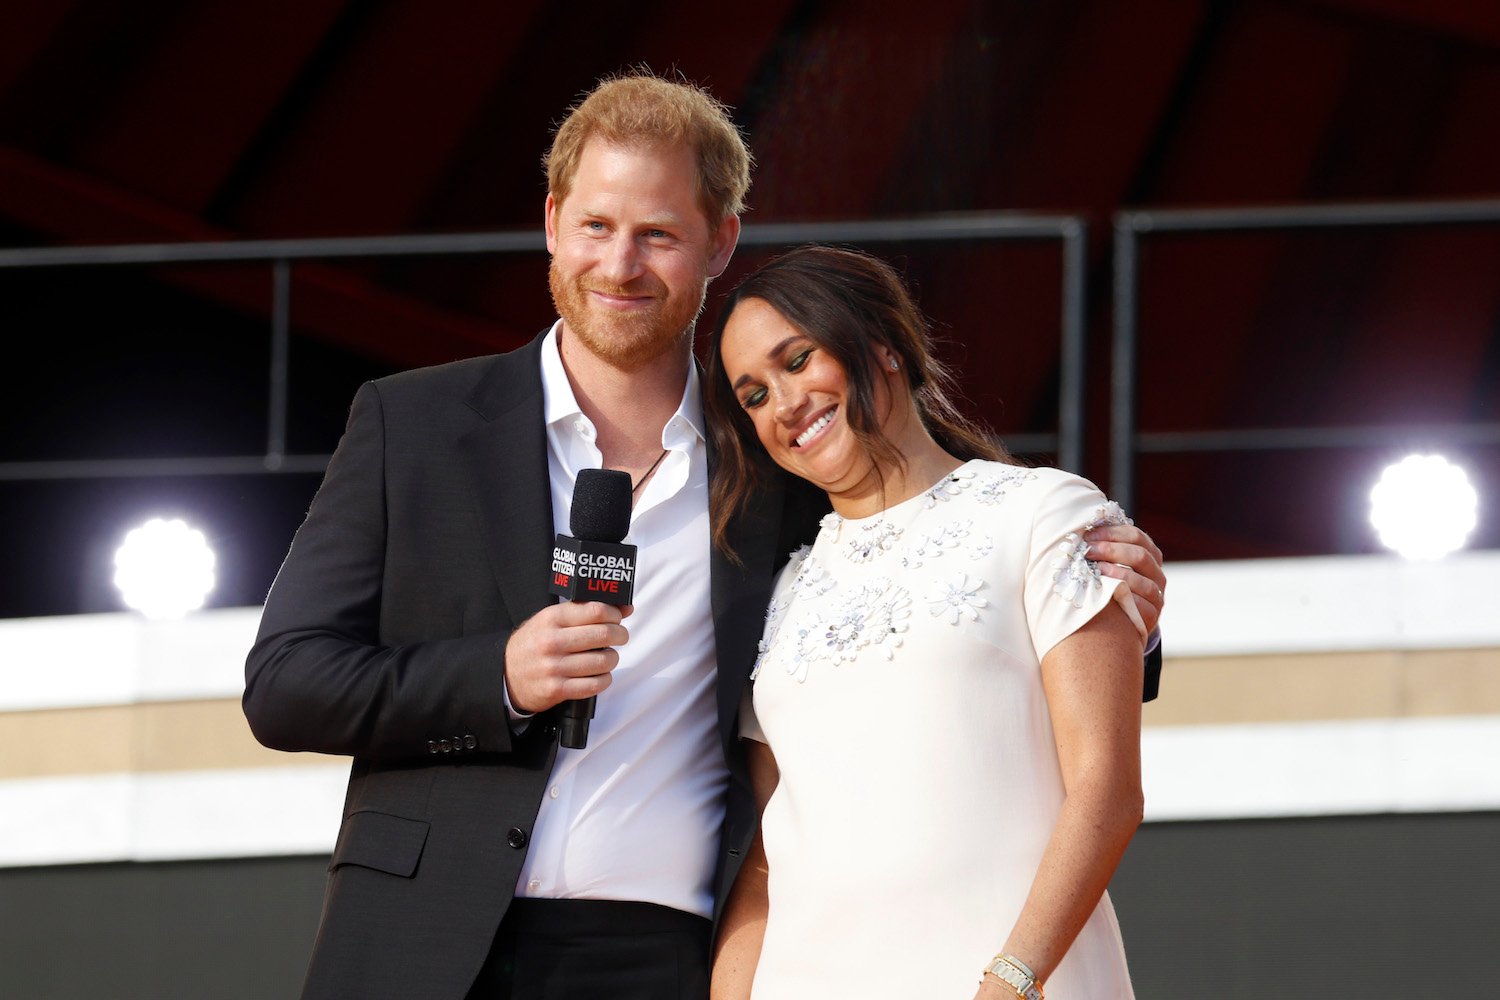 Prince Harry smiles with his arm around Meghan Markle onstage at Global Citizen Live